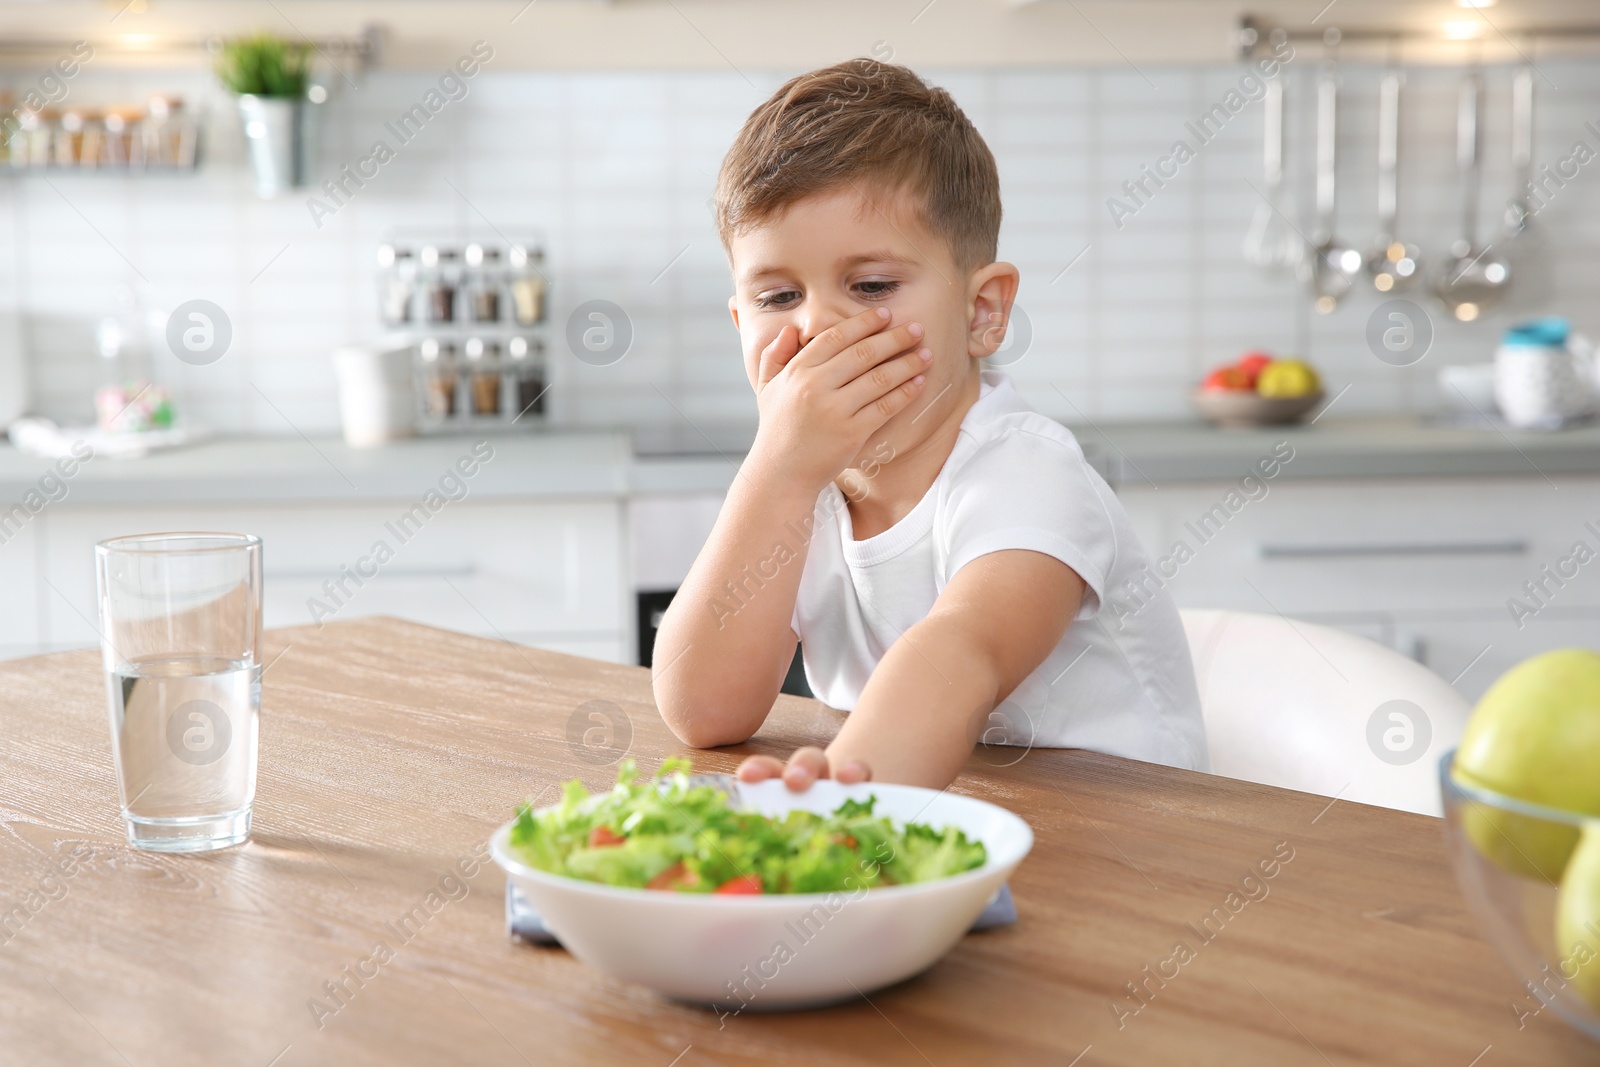 Photo of Little boy covering his mouth and refusing to eat vegetable salad at table in kitchen